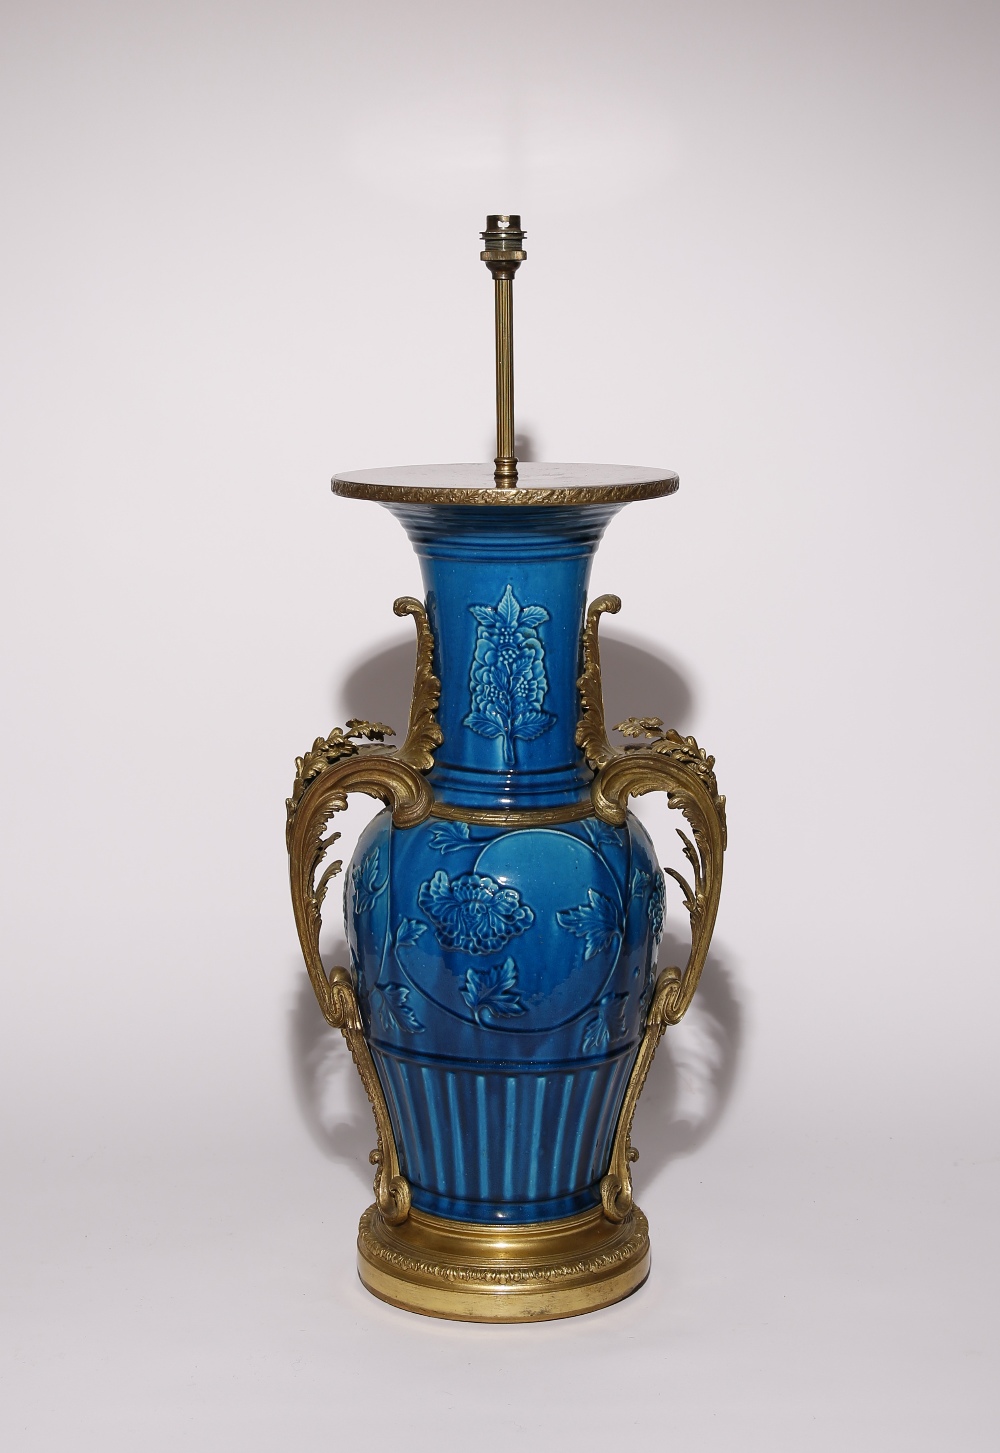 A LARGE MING-STYLE TURQUOISE GLAZED ORMOLU-MOUNTED YEN YEN VASE 19TH CENTURY Decorated in relief